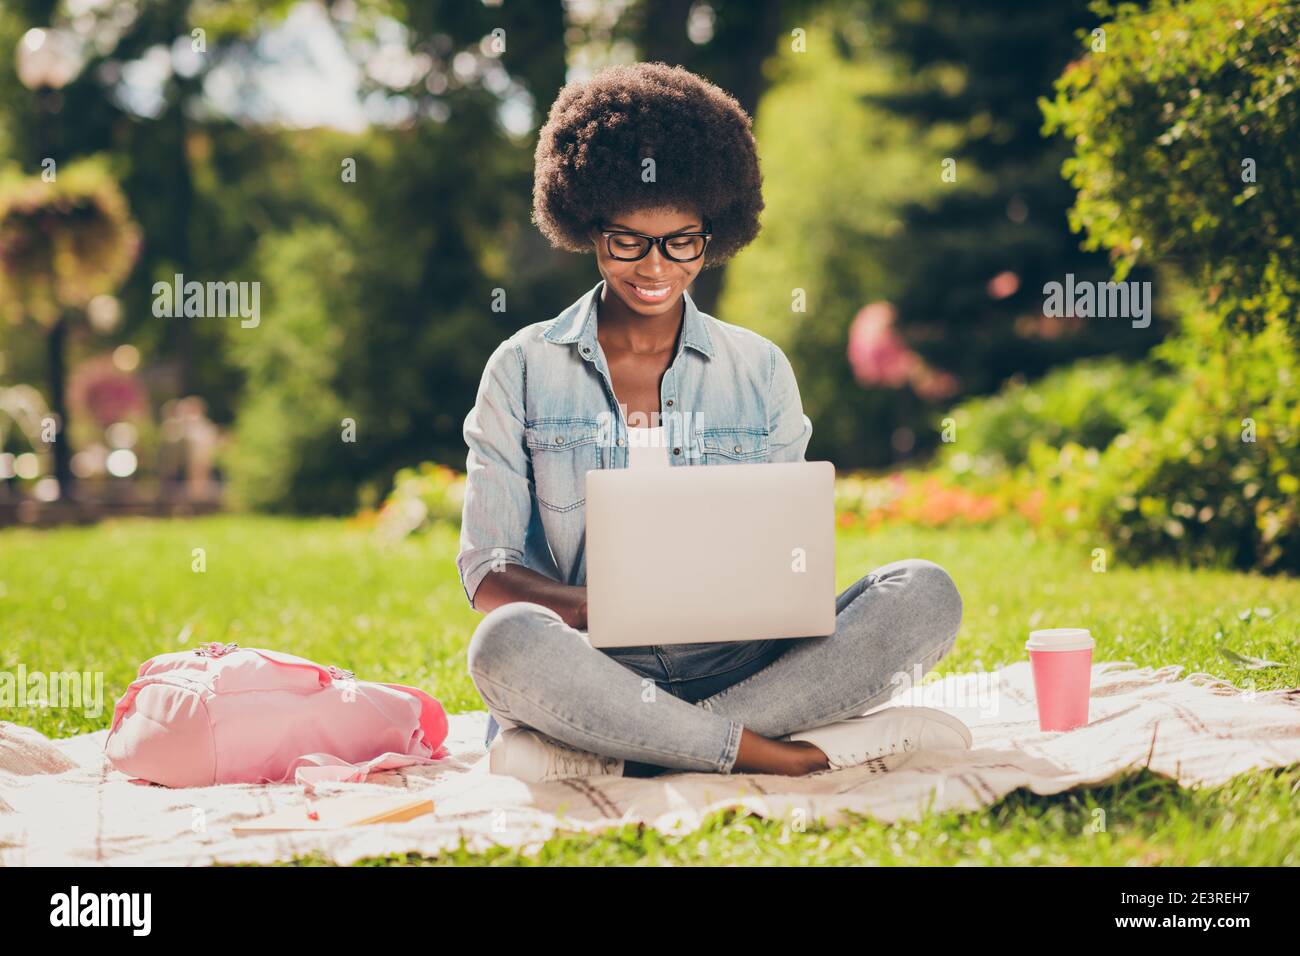 Photo portrait of black skinned young female student working with computer sitting in park wearing spectacles near bag cup of hot drink Stock Photo